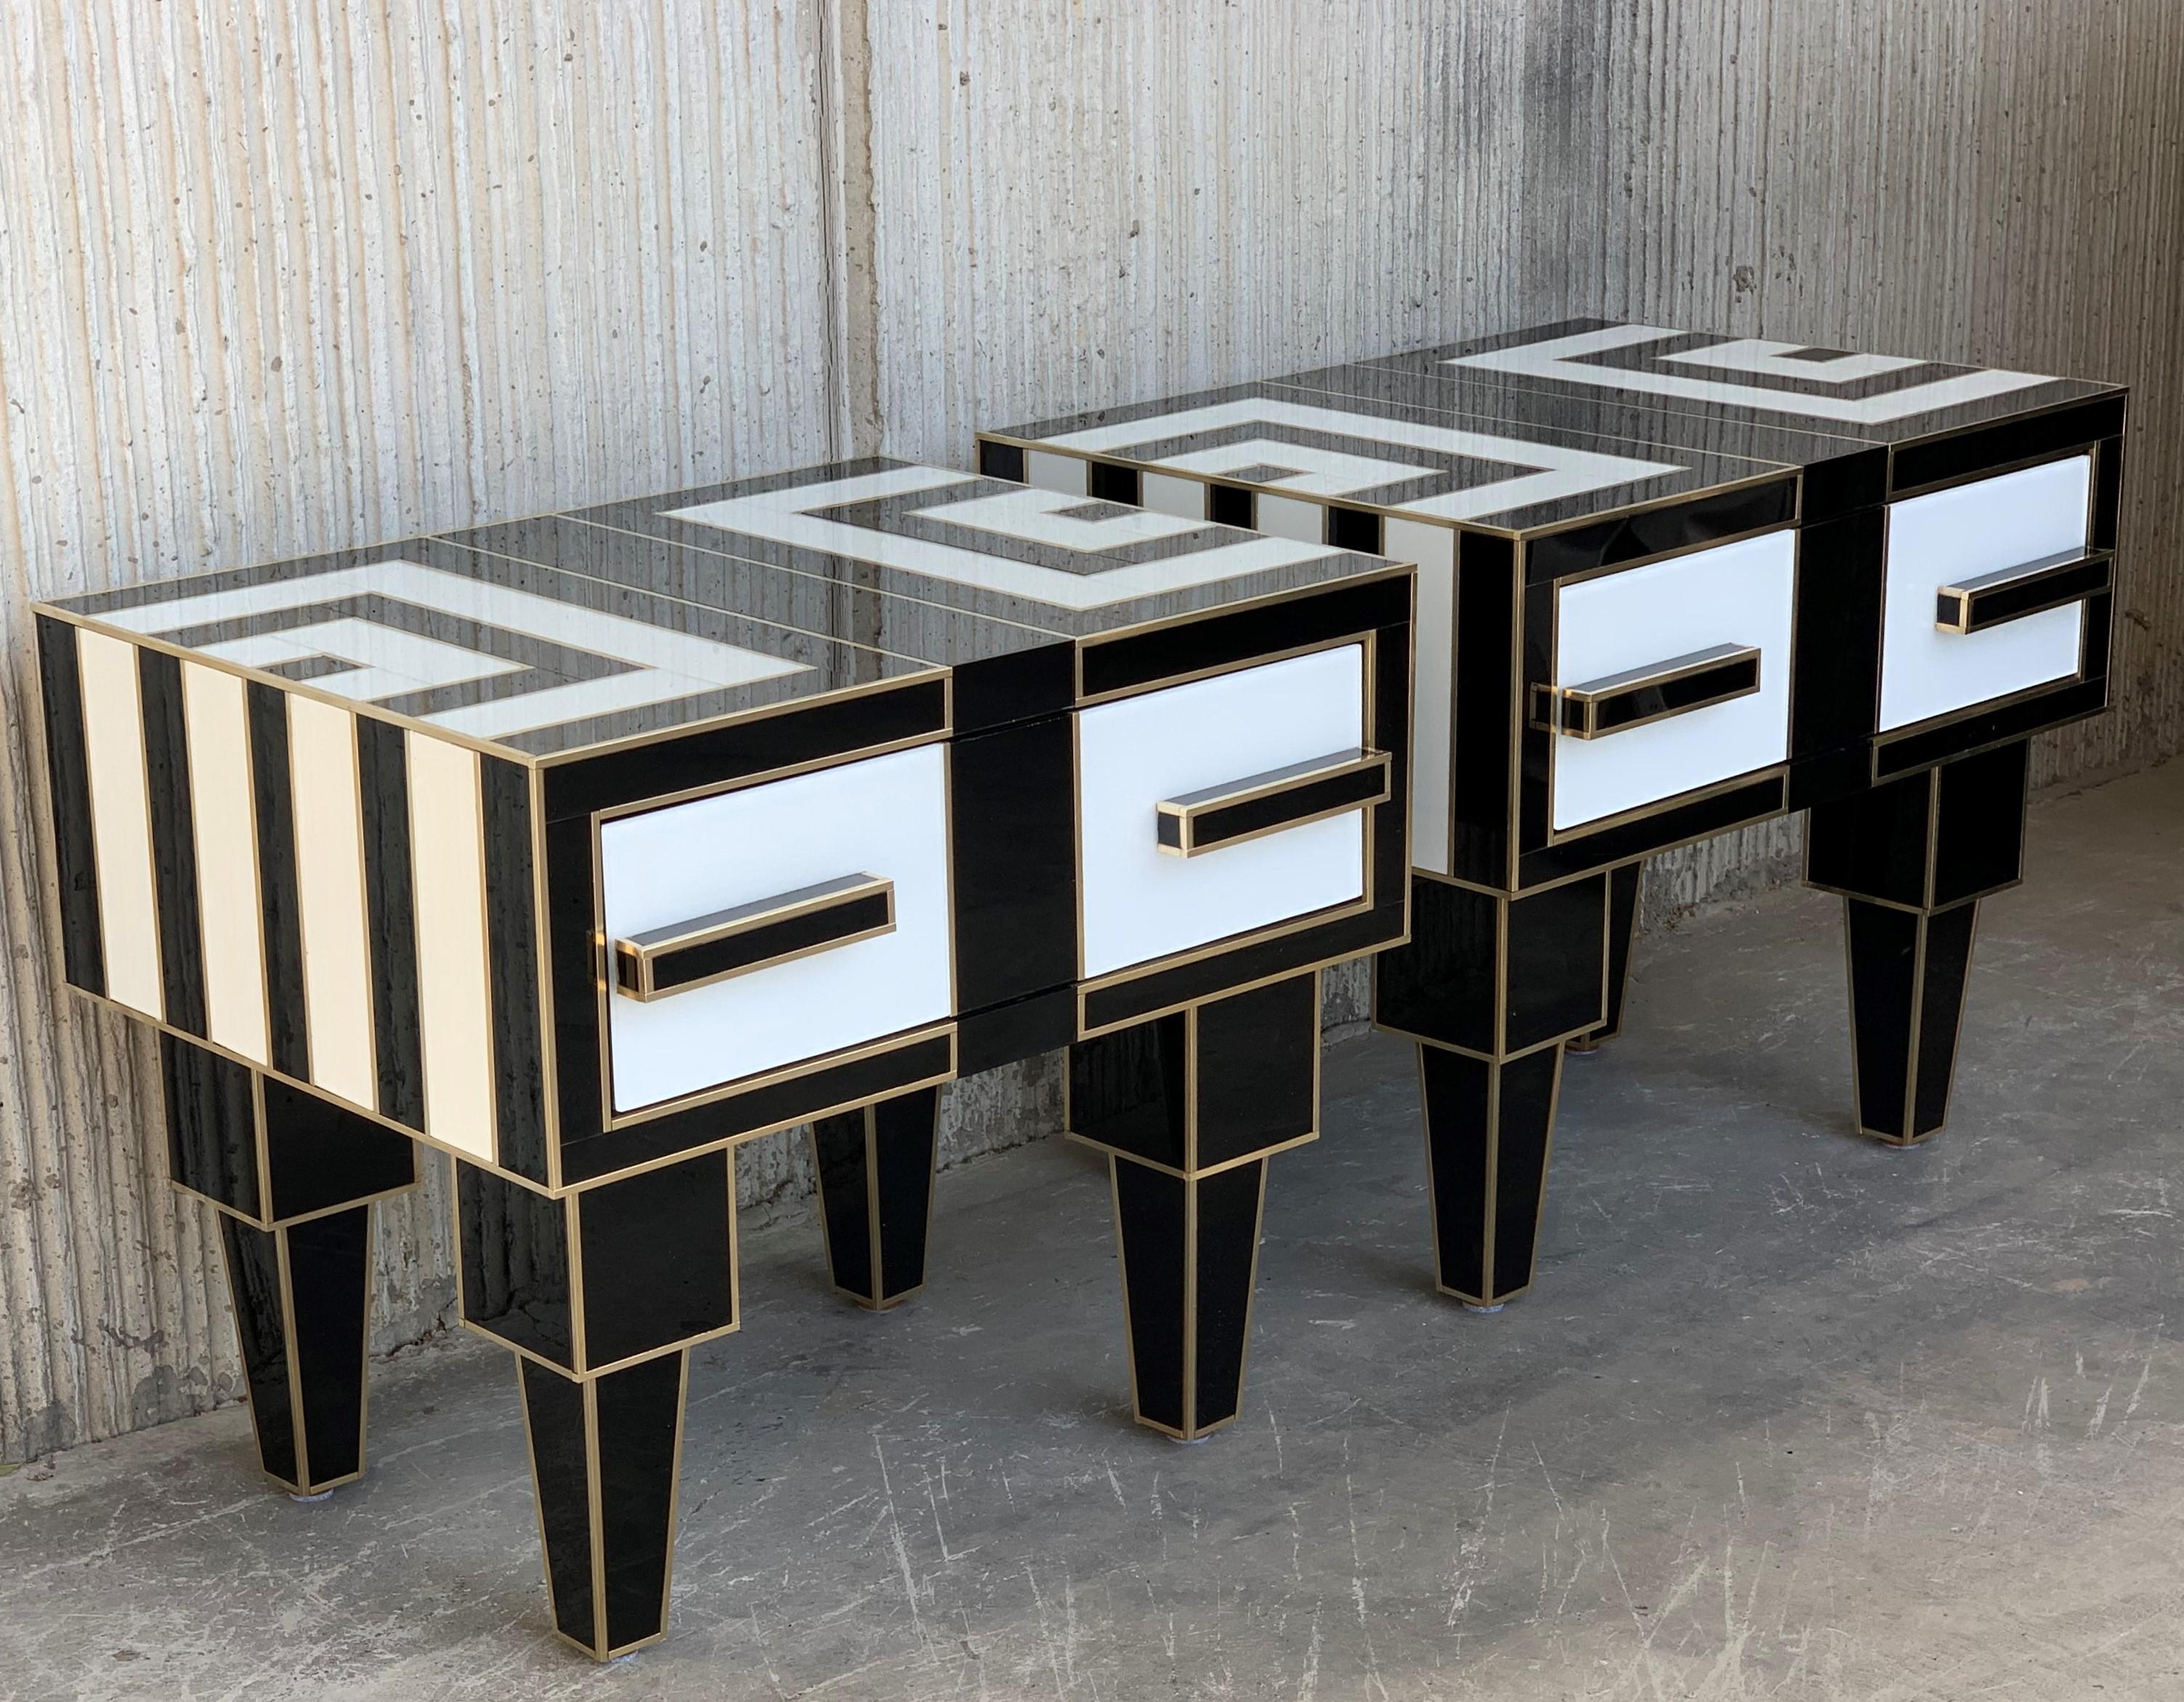 Spanish New Pair of Mirrored & Brass Nightstands with One-Drawer in Black & White Glass